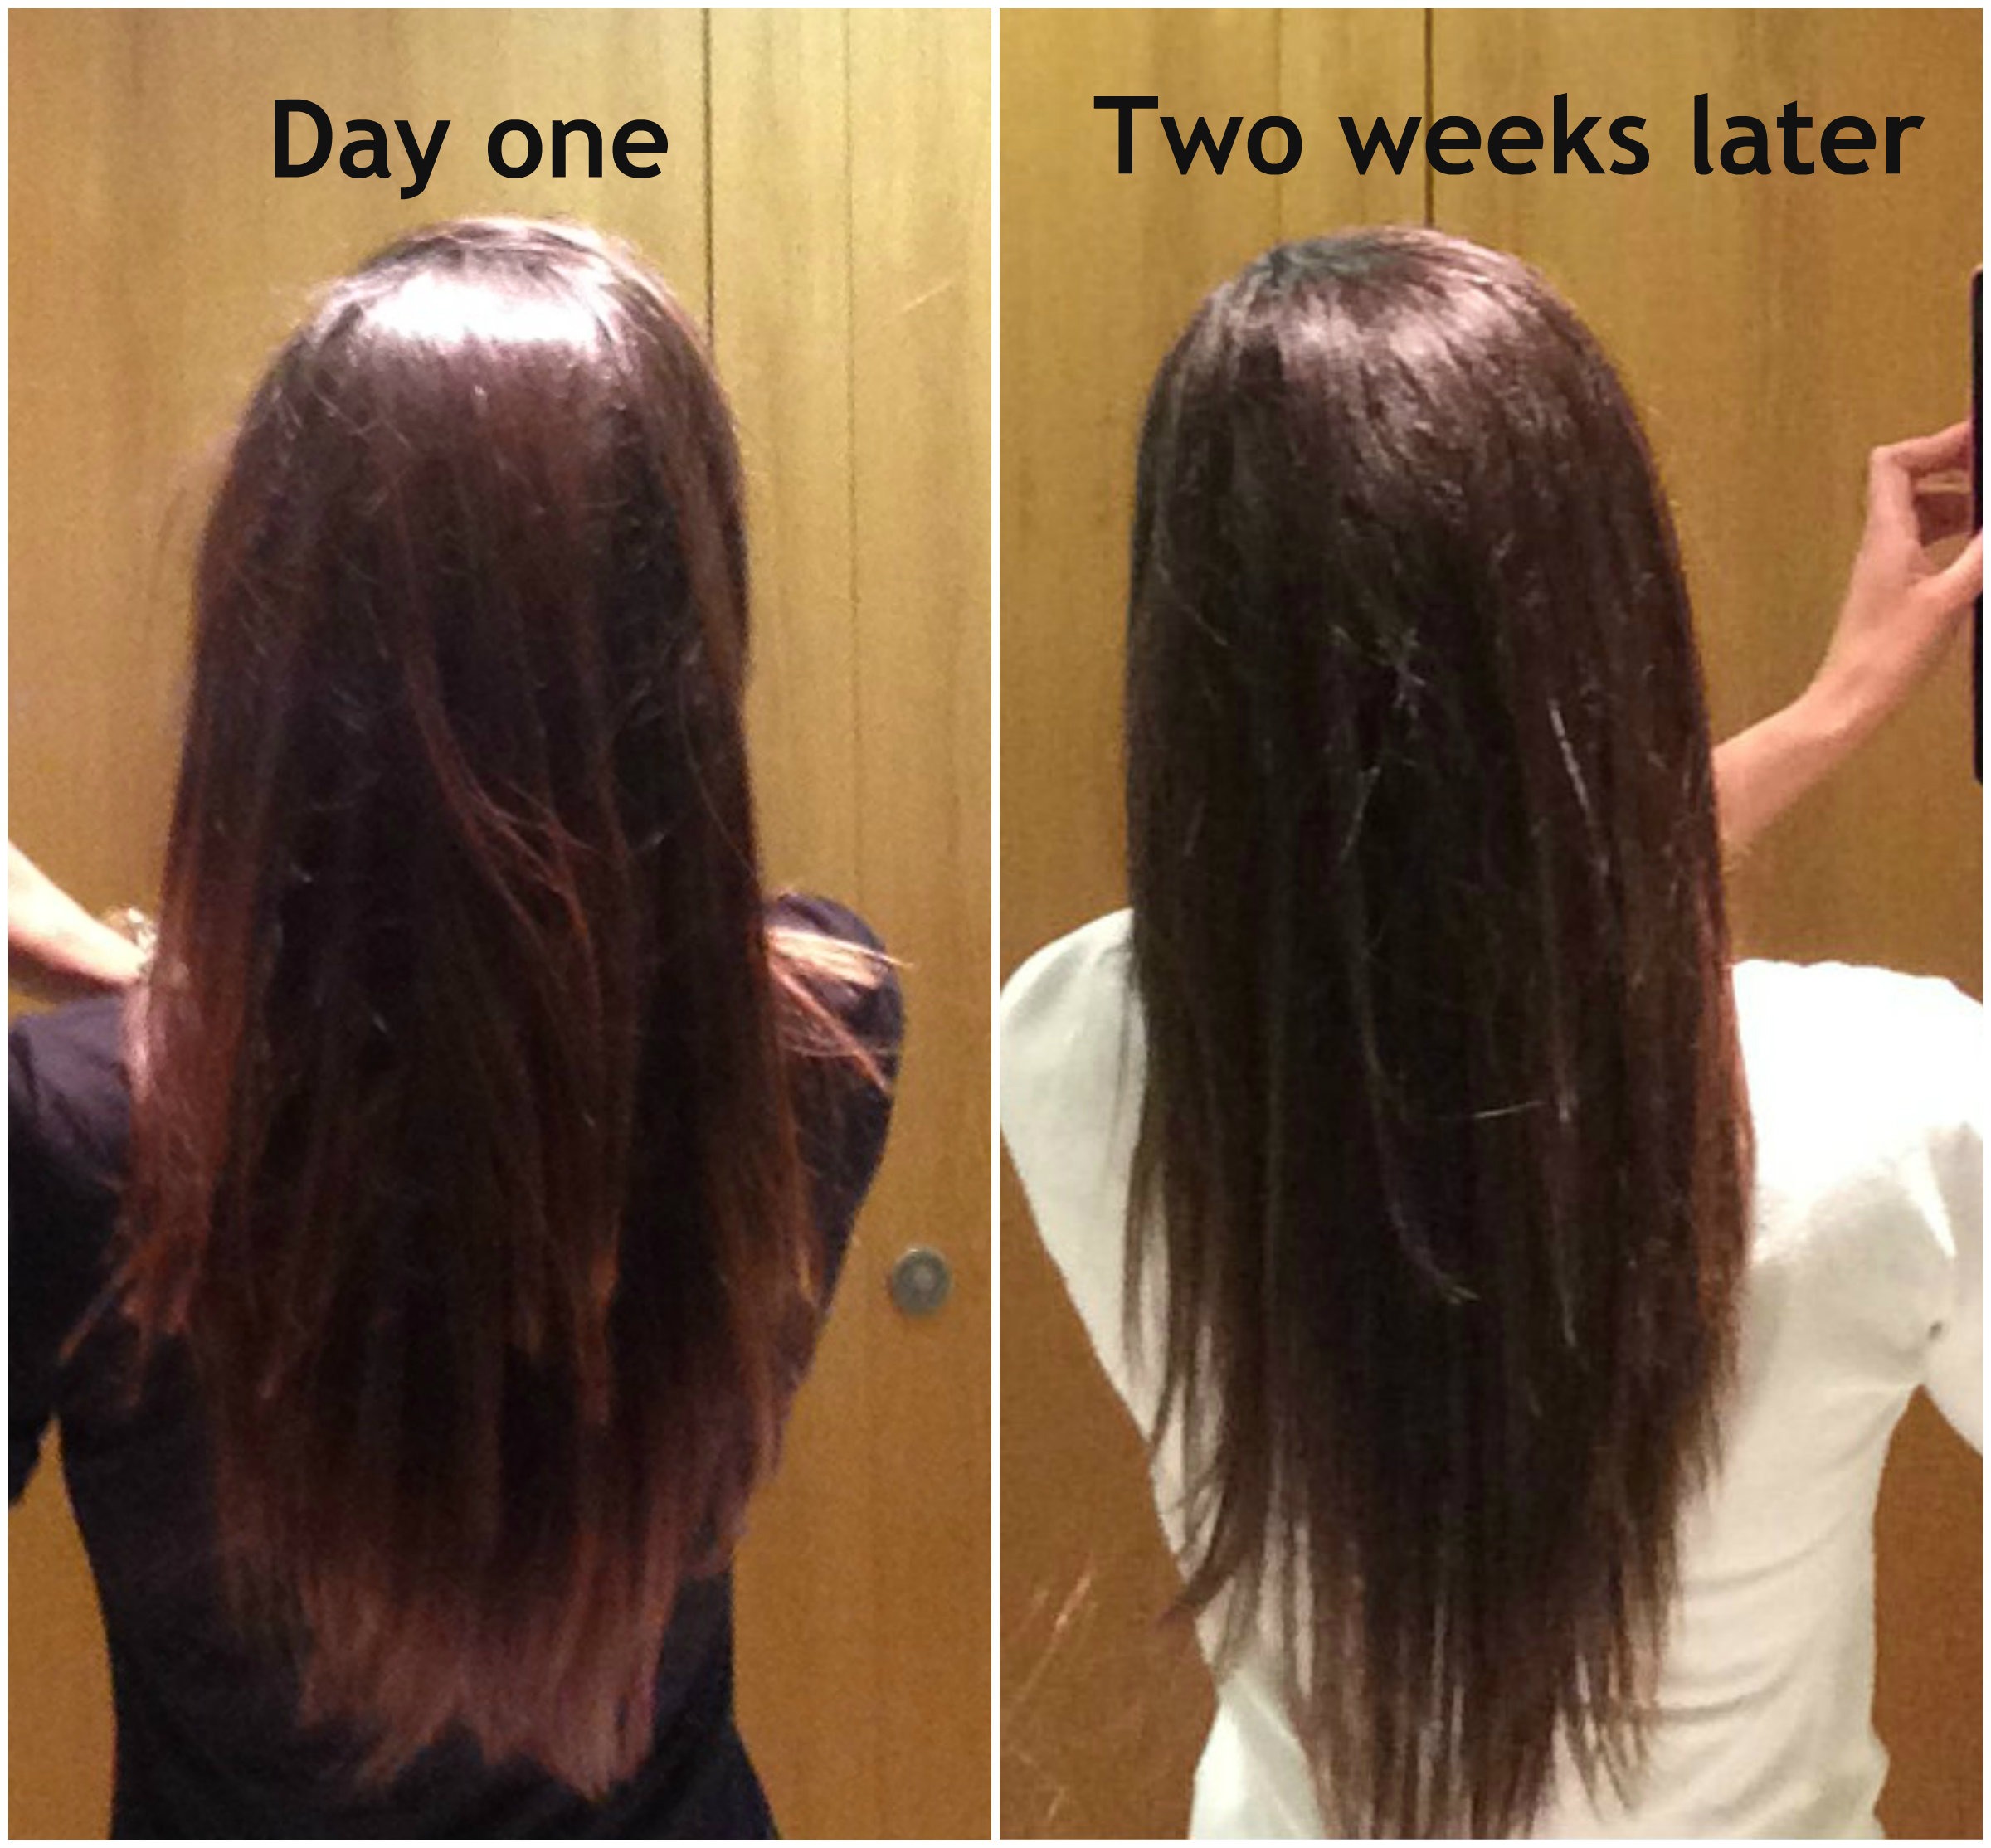 Hair Hero before and after